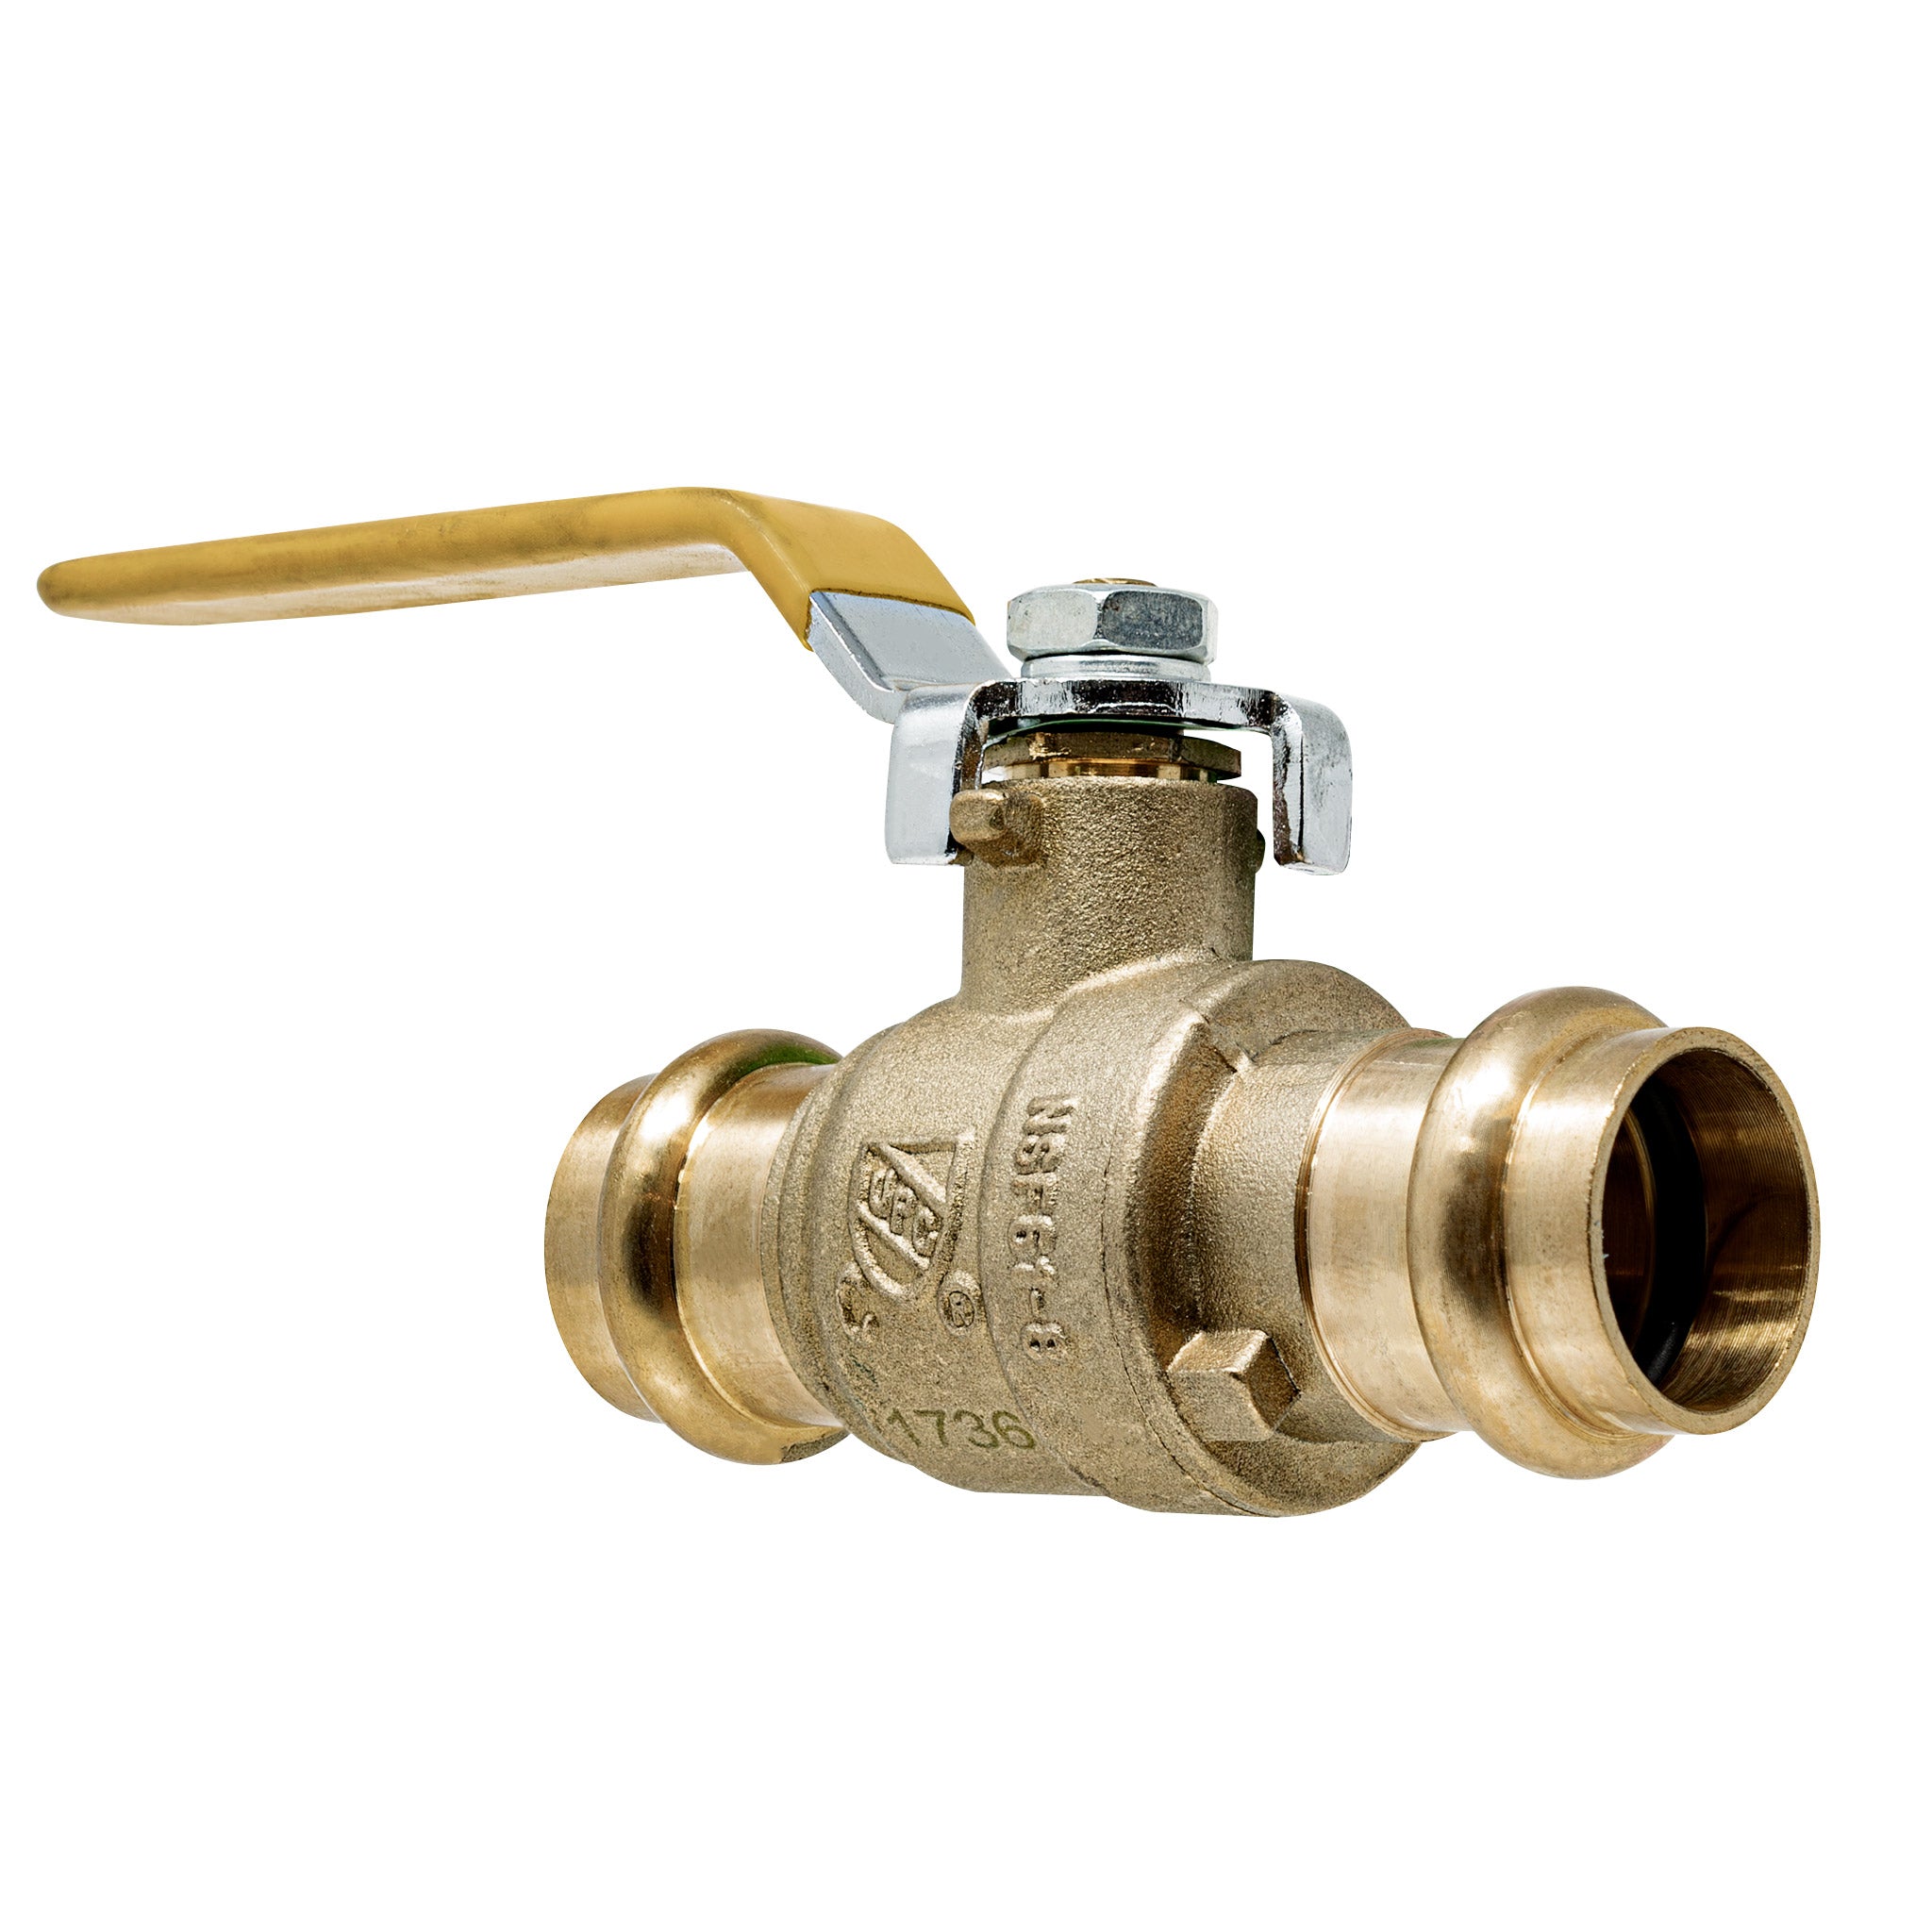 3/4" Press Ends Full Port Ball Valve Lead Free Brass. ProPress Compatible.